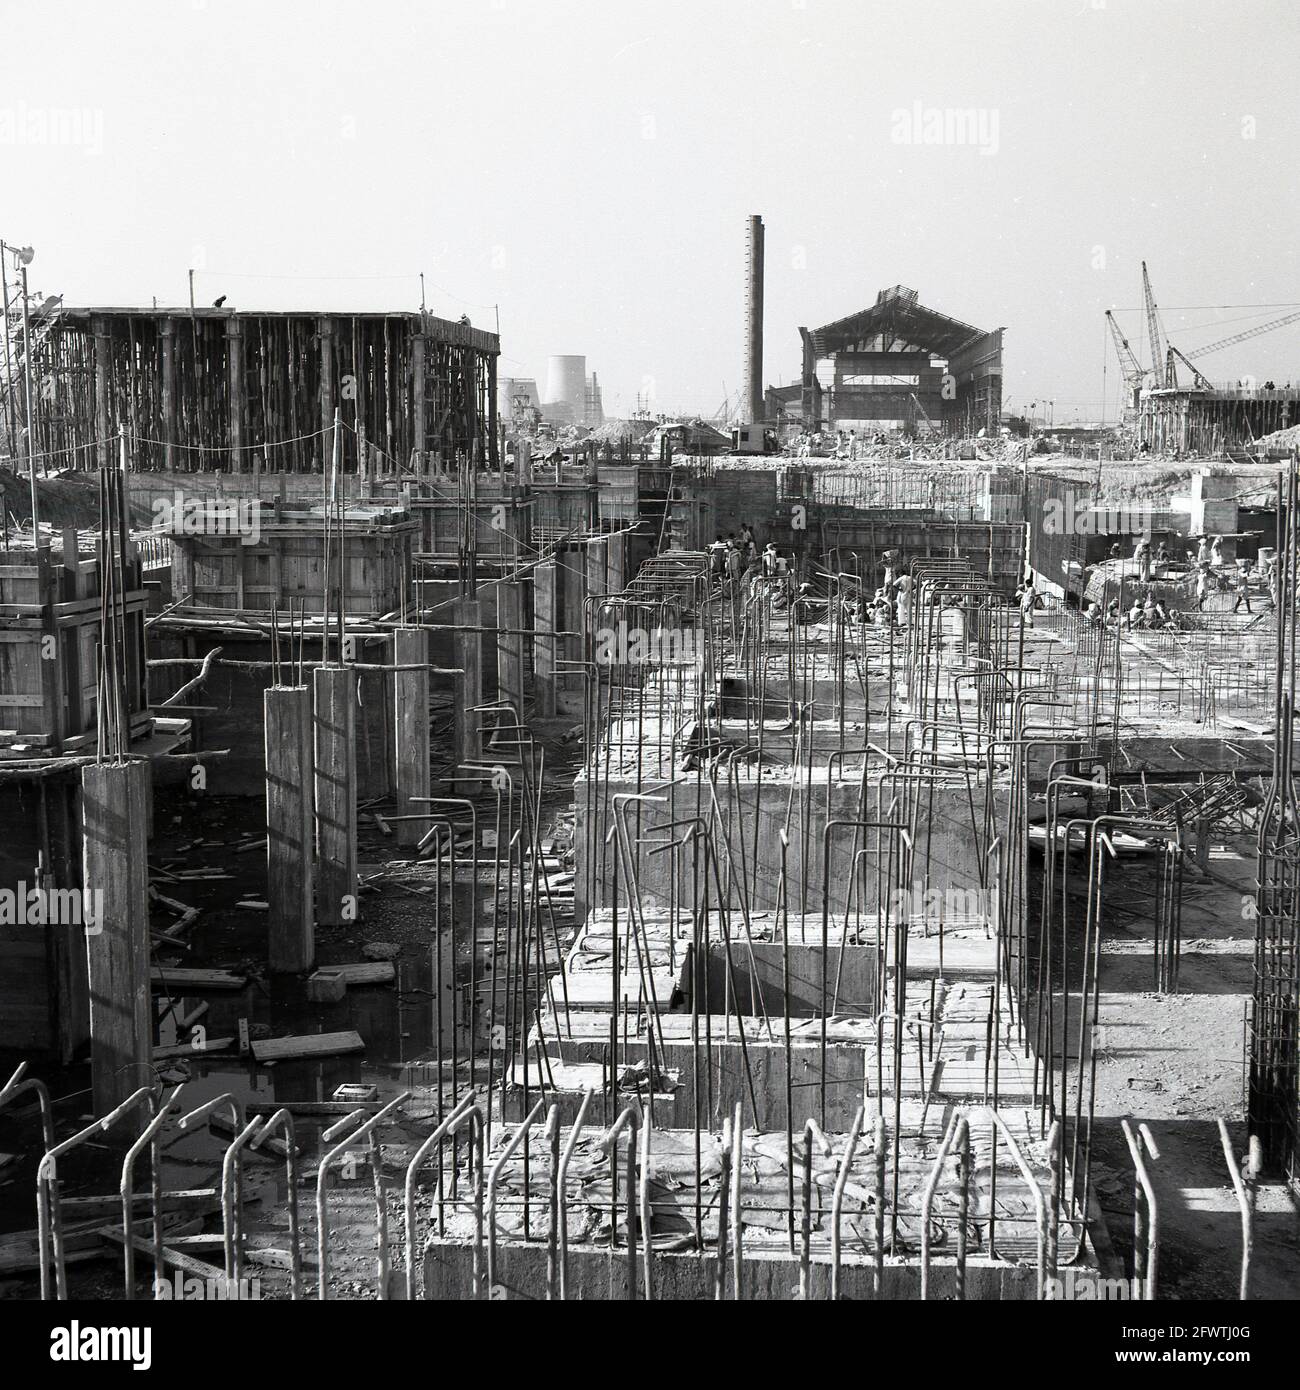 Late 1950s, historical picture of the construction of the giant Durgapur Steel Plant, Durgapur, West Bengal, India, After independence, the steel plant was one of the first major construction projects in India and in 1957 an indian company, Patel Engineering, in collaboration with a British business, Cementation UK, undertook the entire civil engineering and ground works. The massive indusrtrial complex involved building and machinery foundations, concrete piles, building structure, railway tracks, roads and other serivces such as drainage and a water supply. The plant was finished in 1959. Stock Photo